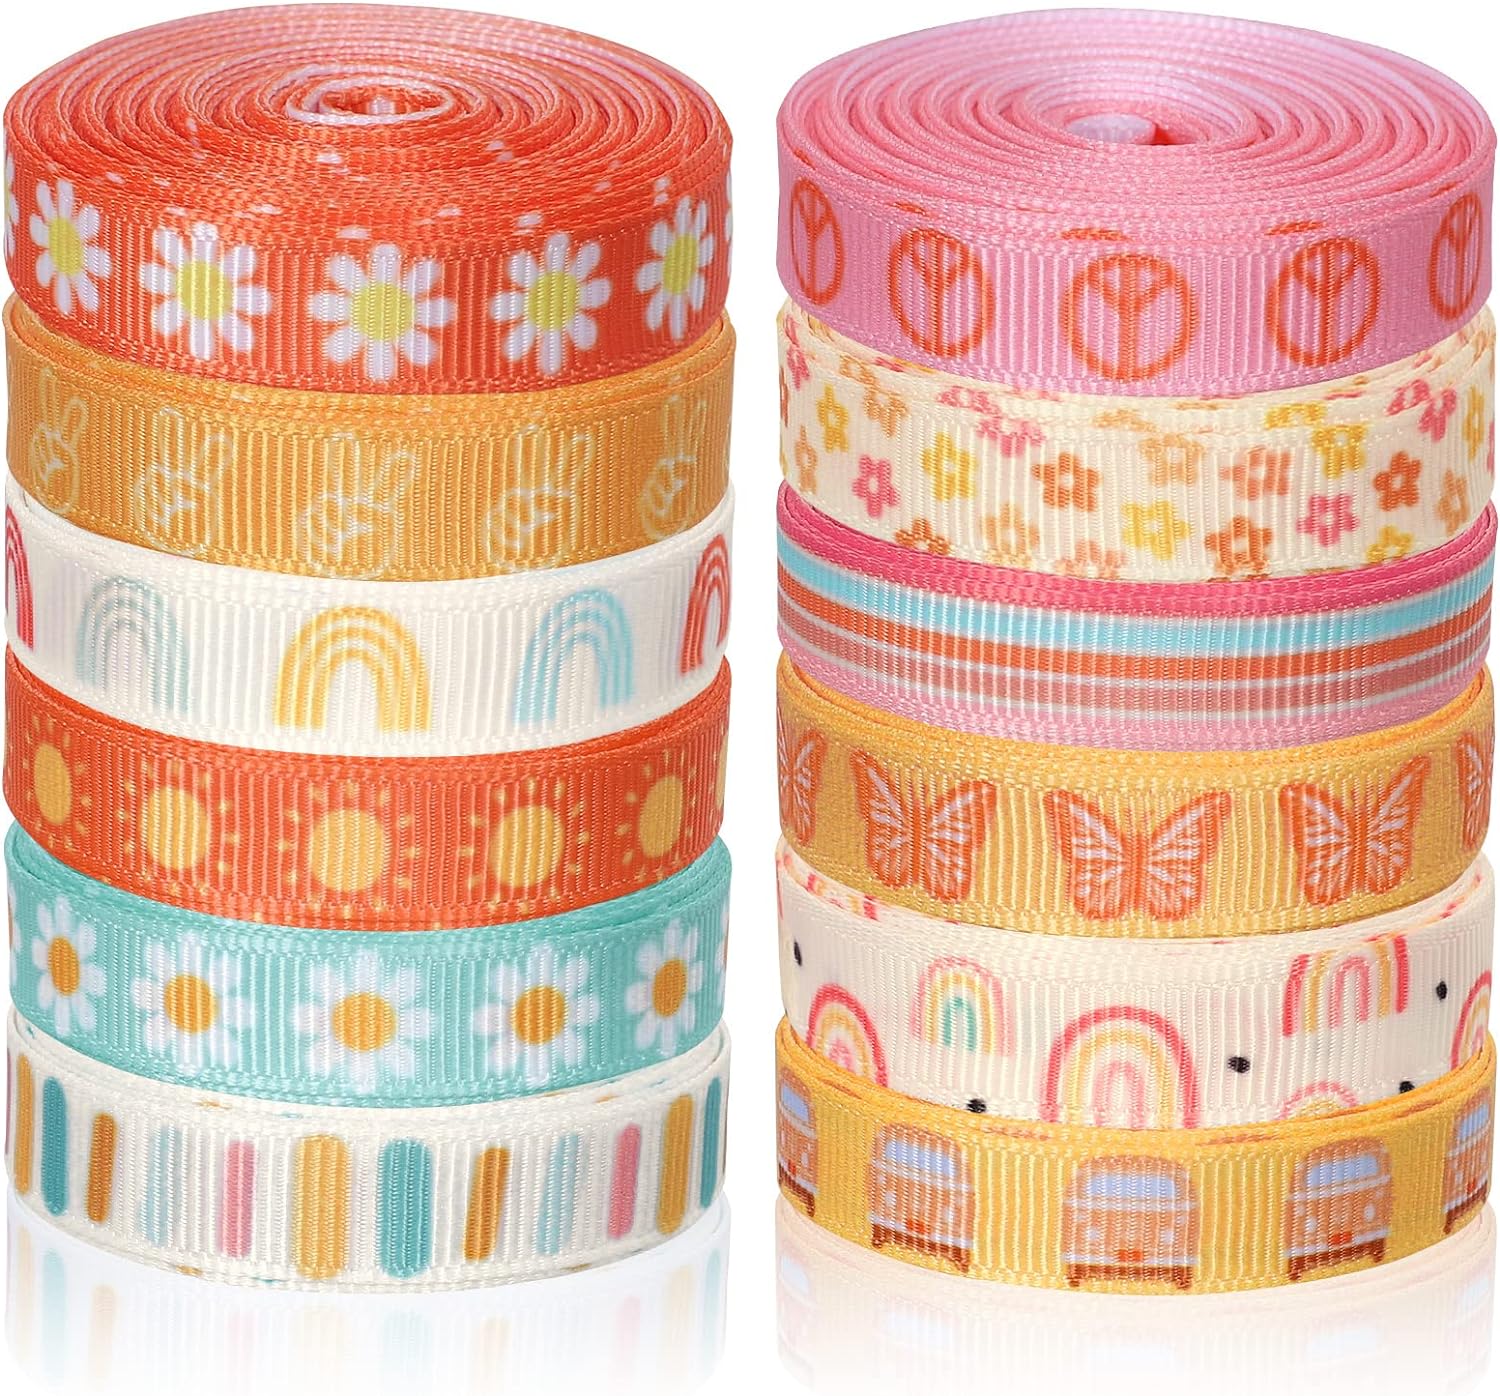 LEMO Rainbow Butterfly Daisy Flower Craft Ribbon Printed Grosgrain Fabric Ribbon for Wreath Bow Making DIY Crafts Wrapping